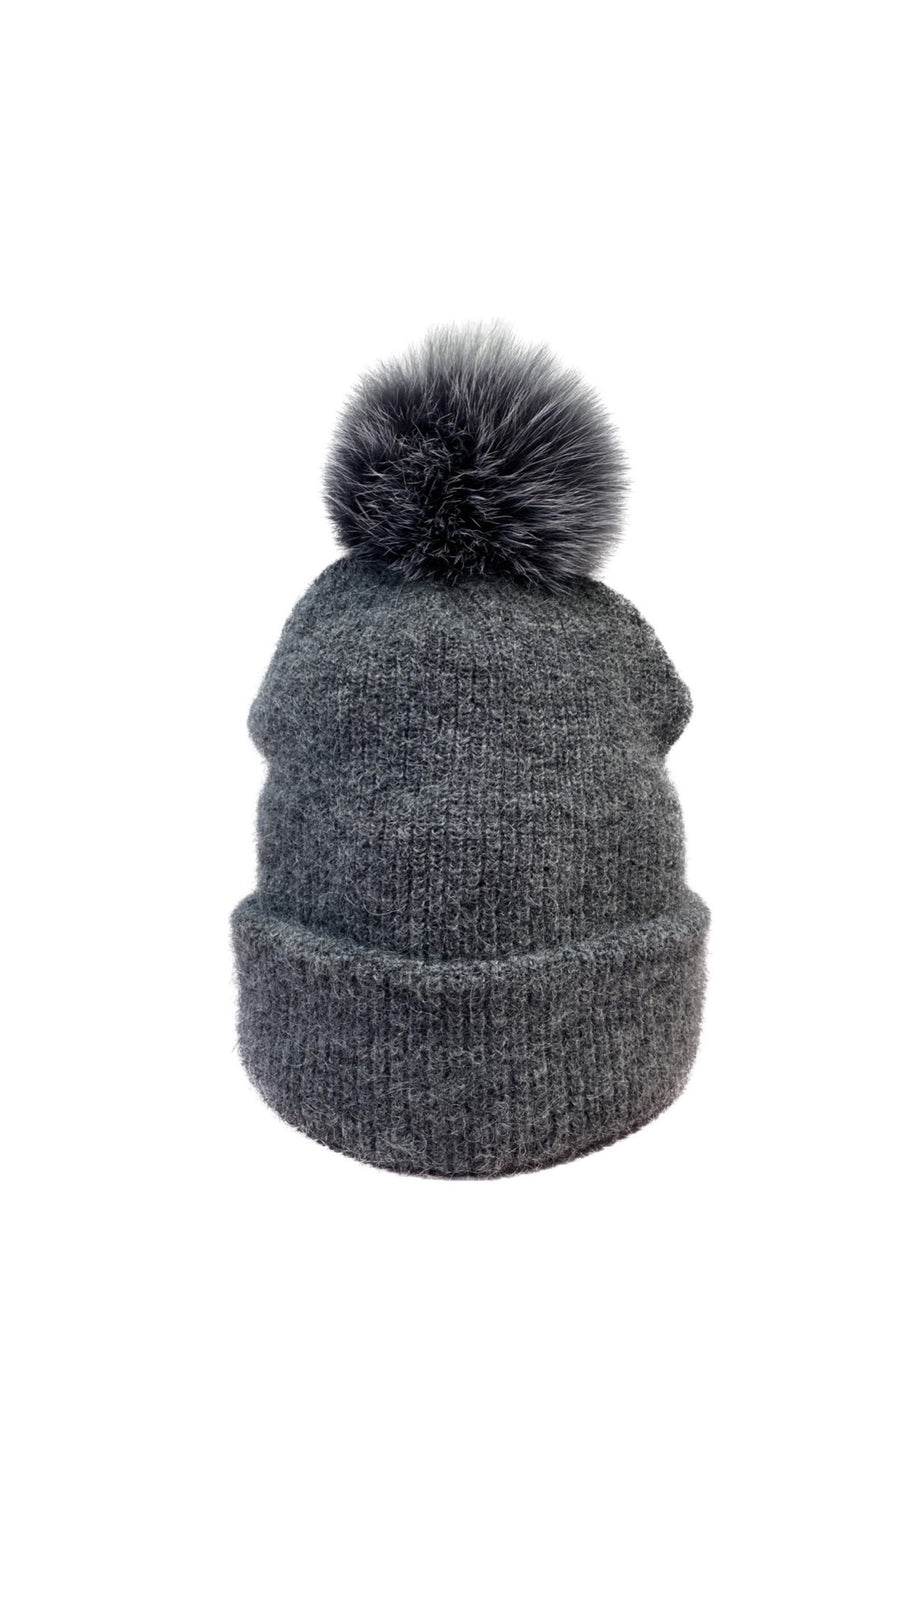 Beanie, double layer of mohair wool knit grey